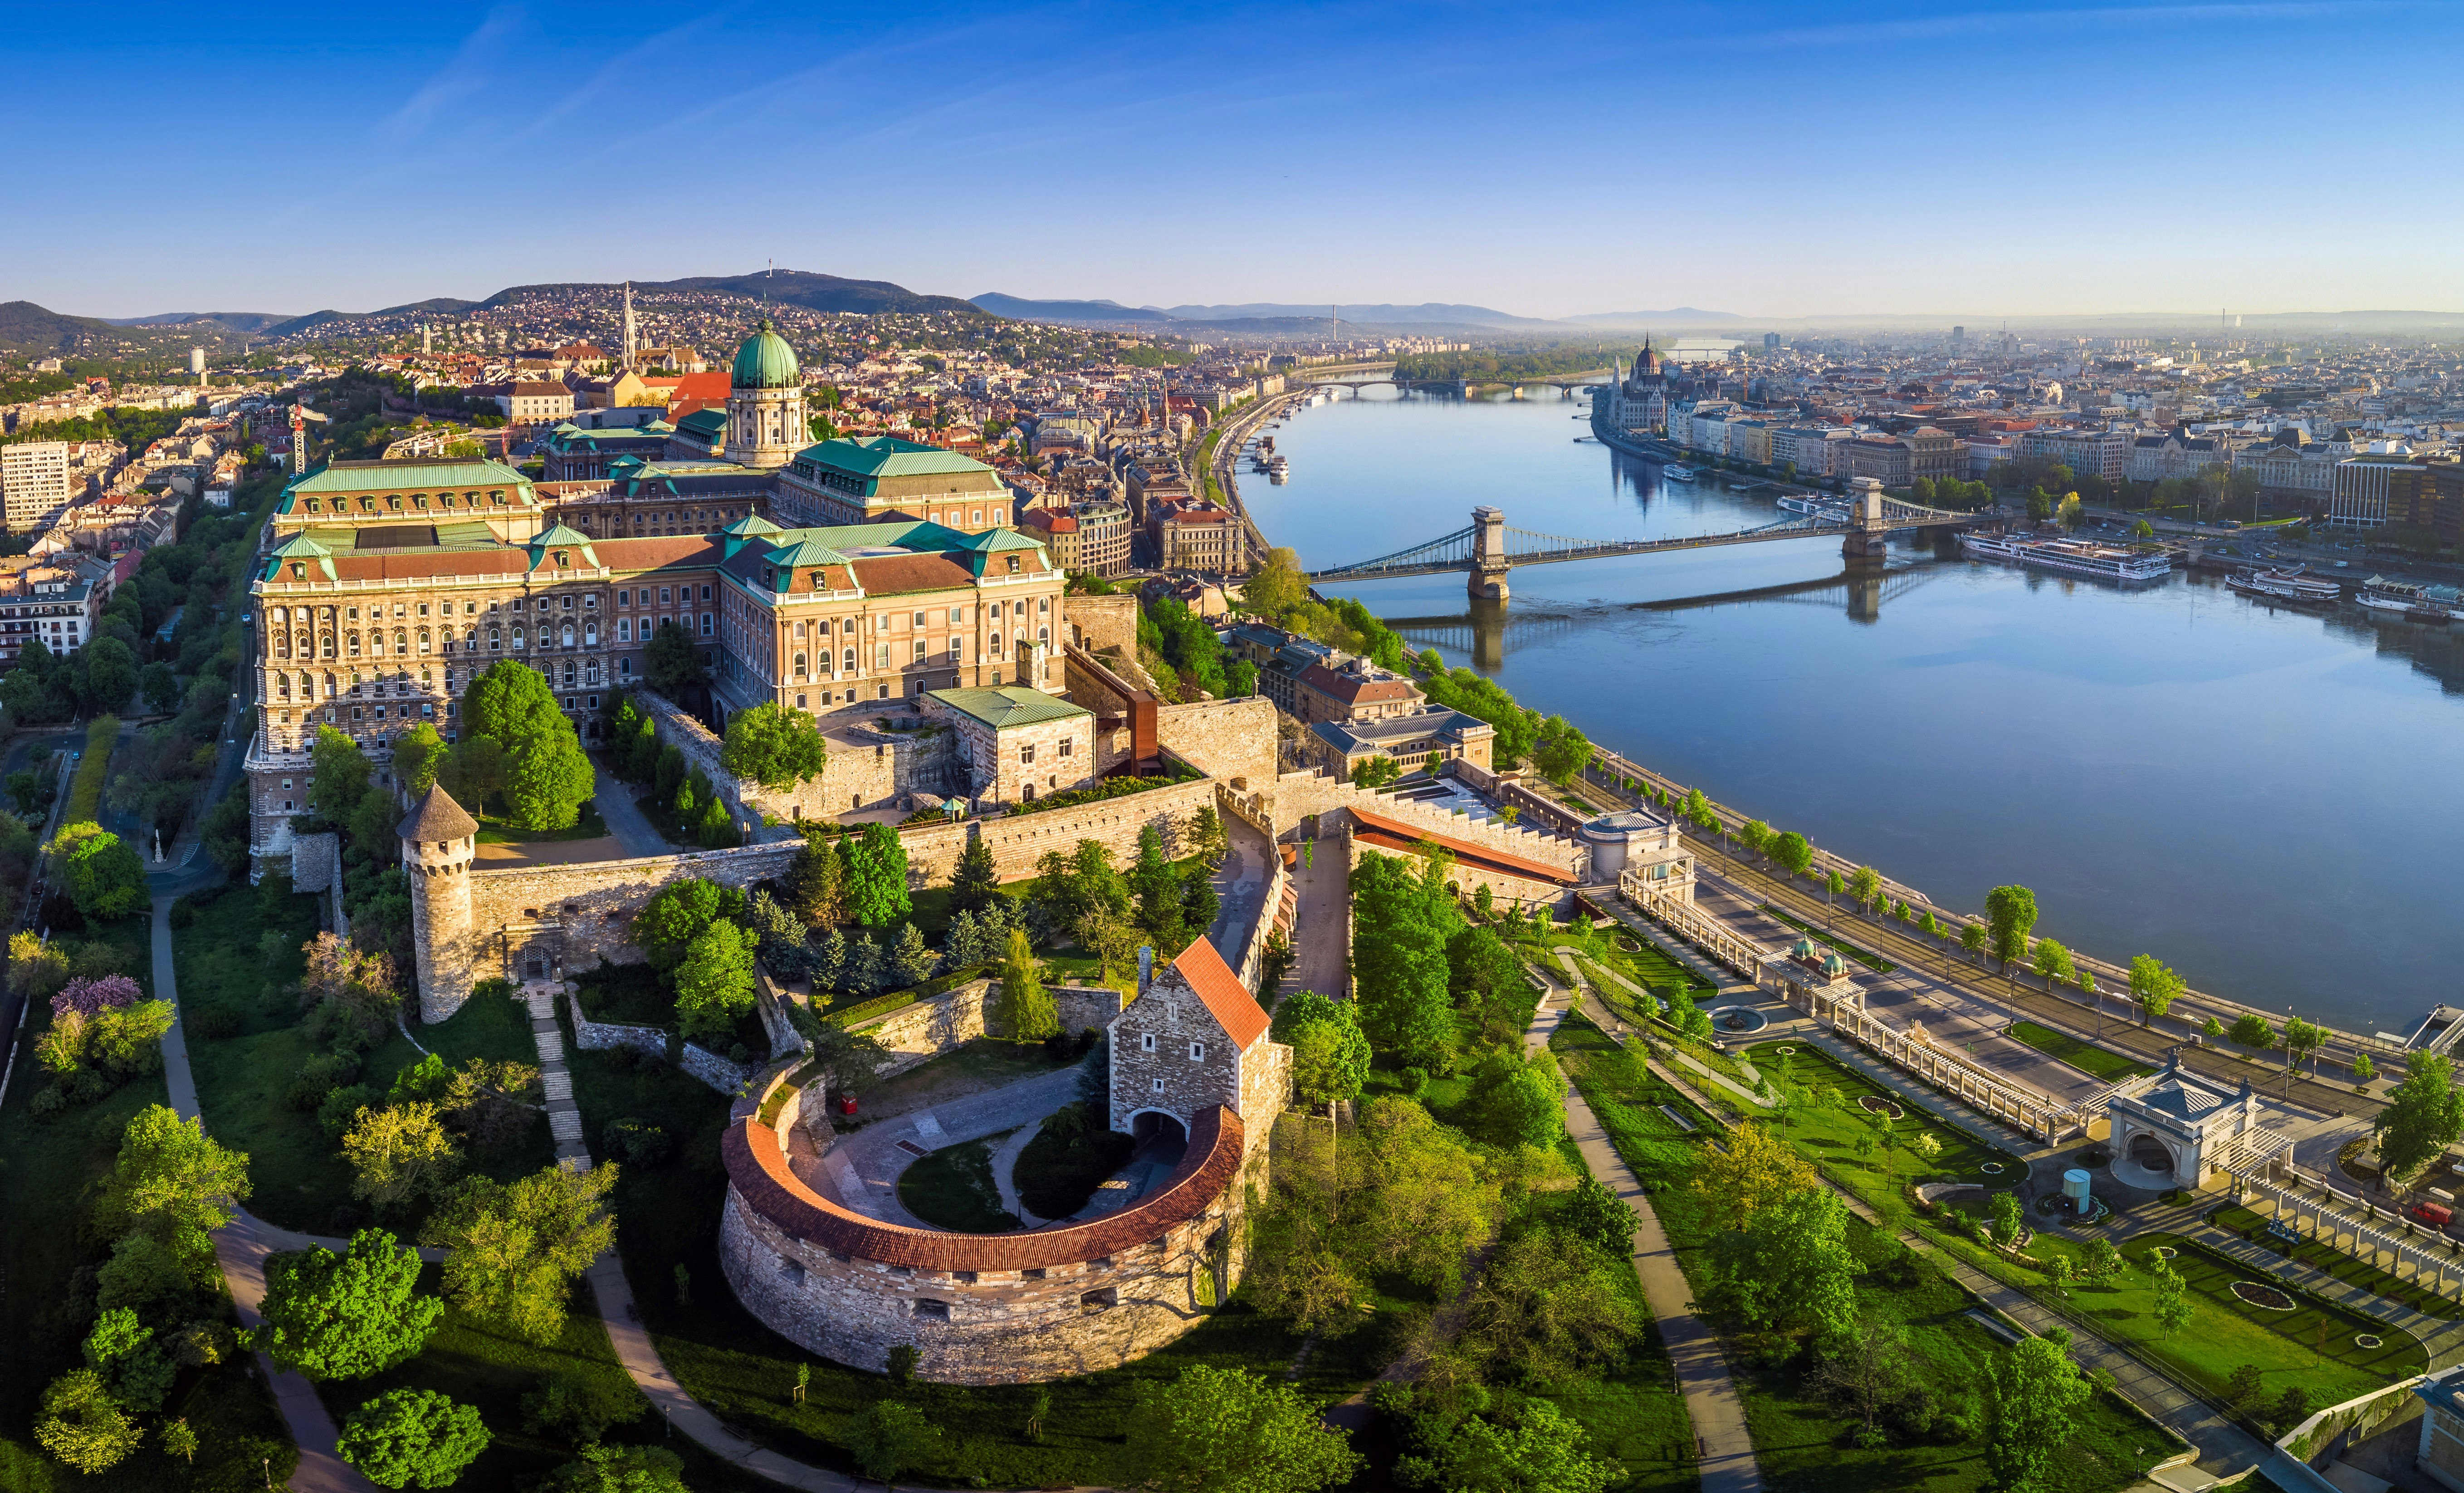 An aerial view of Budapest's Castle District on a sunny day. The old stone buildings are surrounded by pockets of greenery.